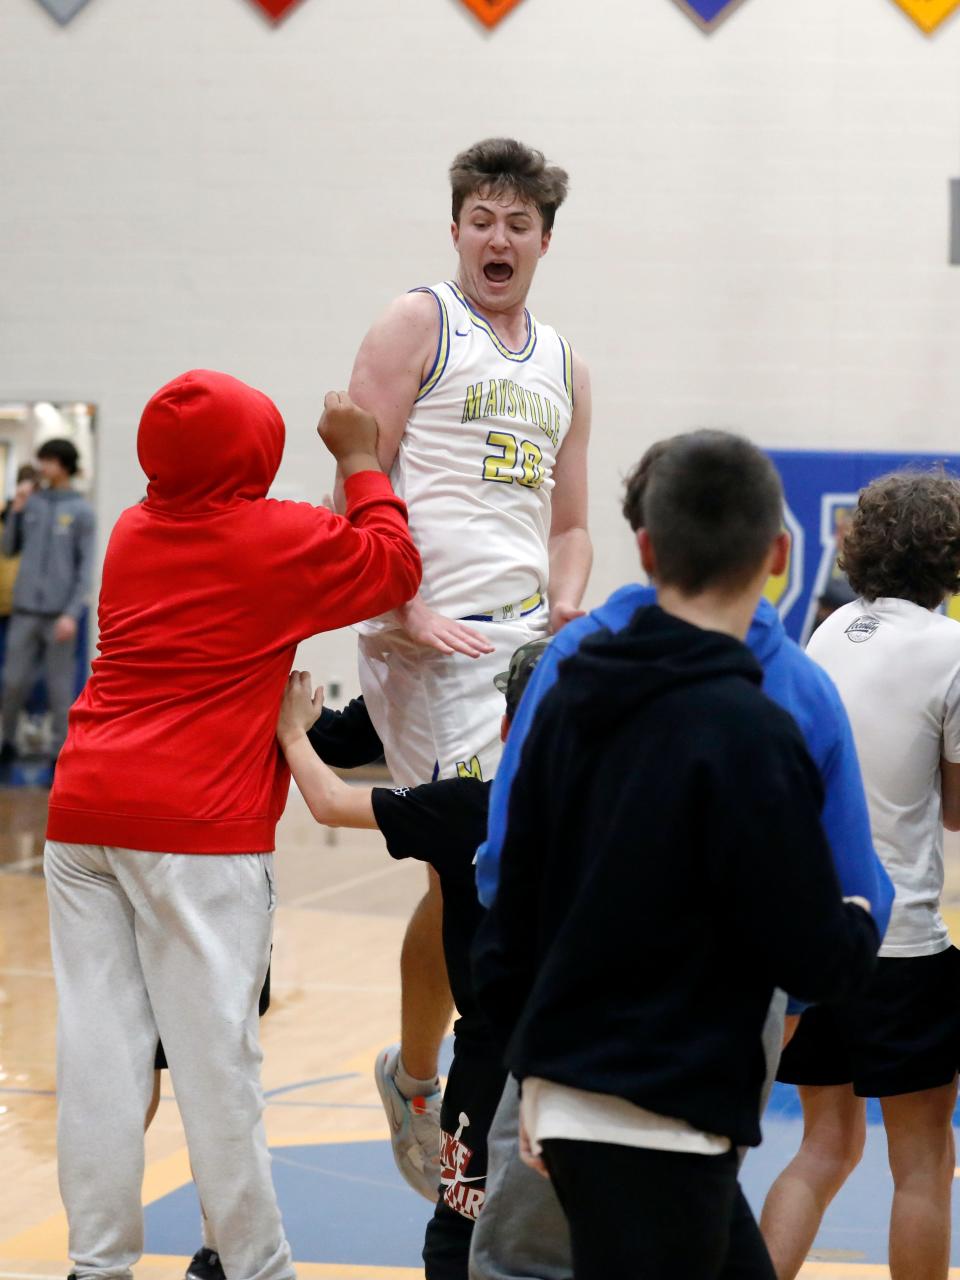 Maysville senior Connor Larimer celebrates with the fans following a 57-46 win against visiting Tri-Valley on Friday night in Newton Township. Larimer's interior defense and rebounding played critical roles in the undefeated Panthers' taking command in the Muskingum Valley League's Big School Division.